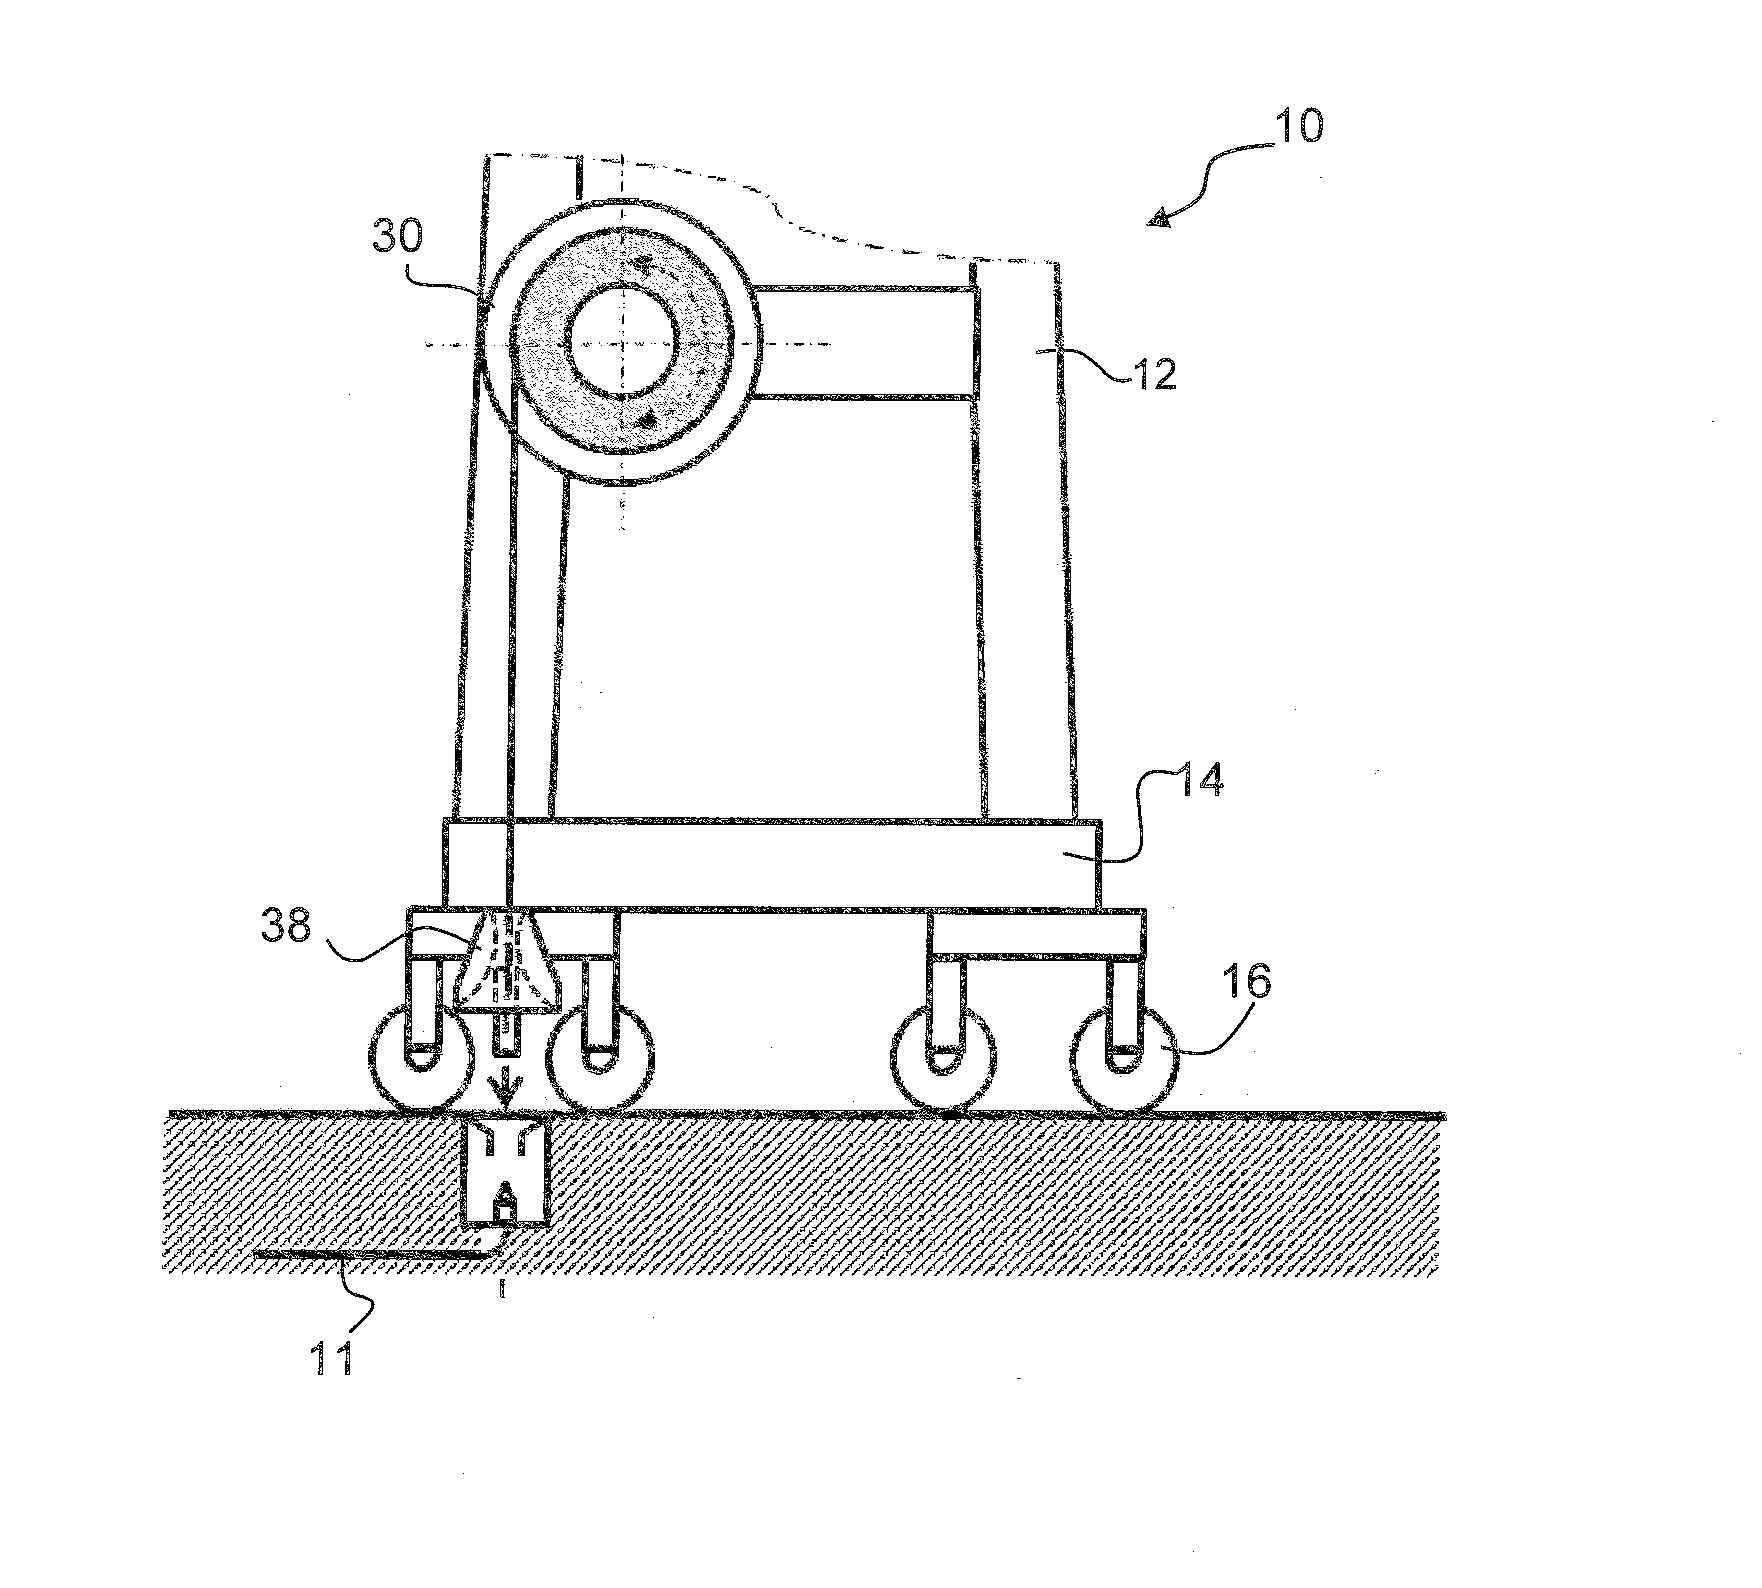 A Device For Automatically Connecting A Vehicle To An Electric Power Supply